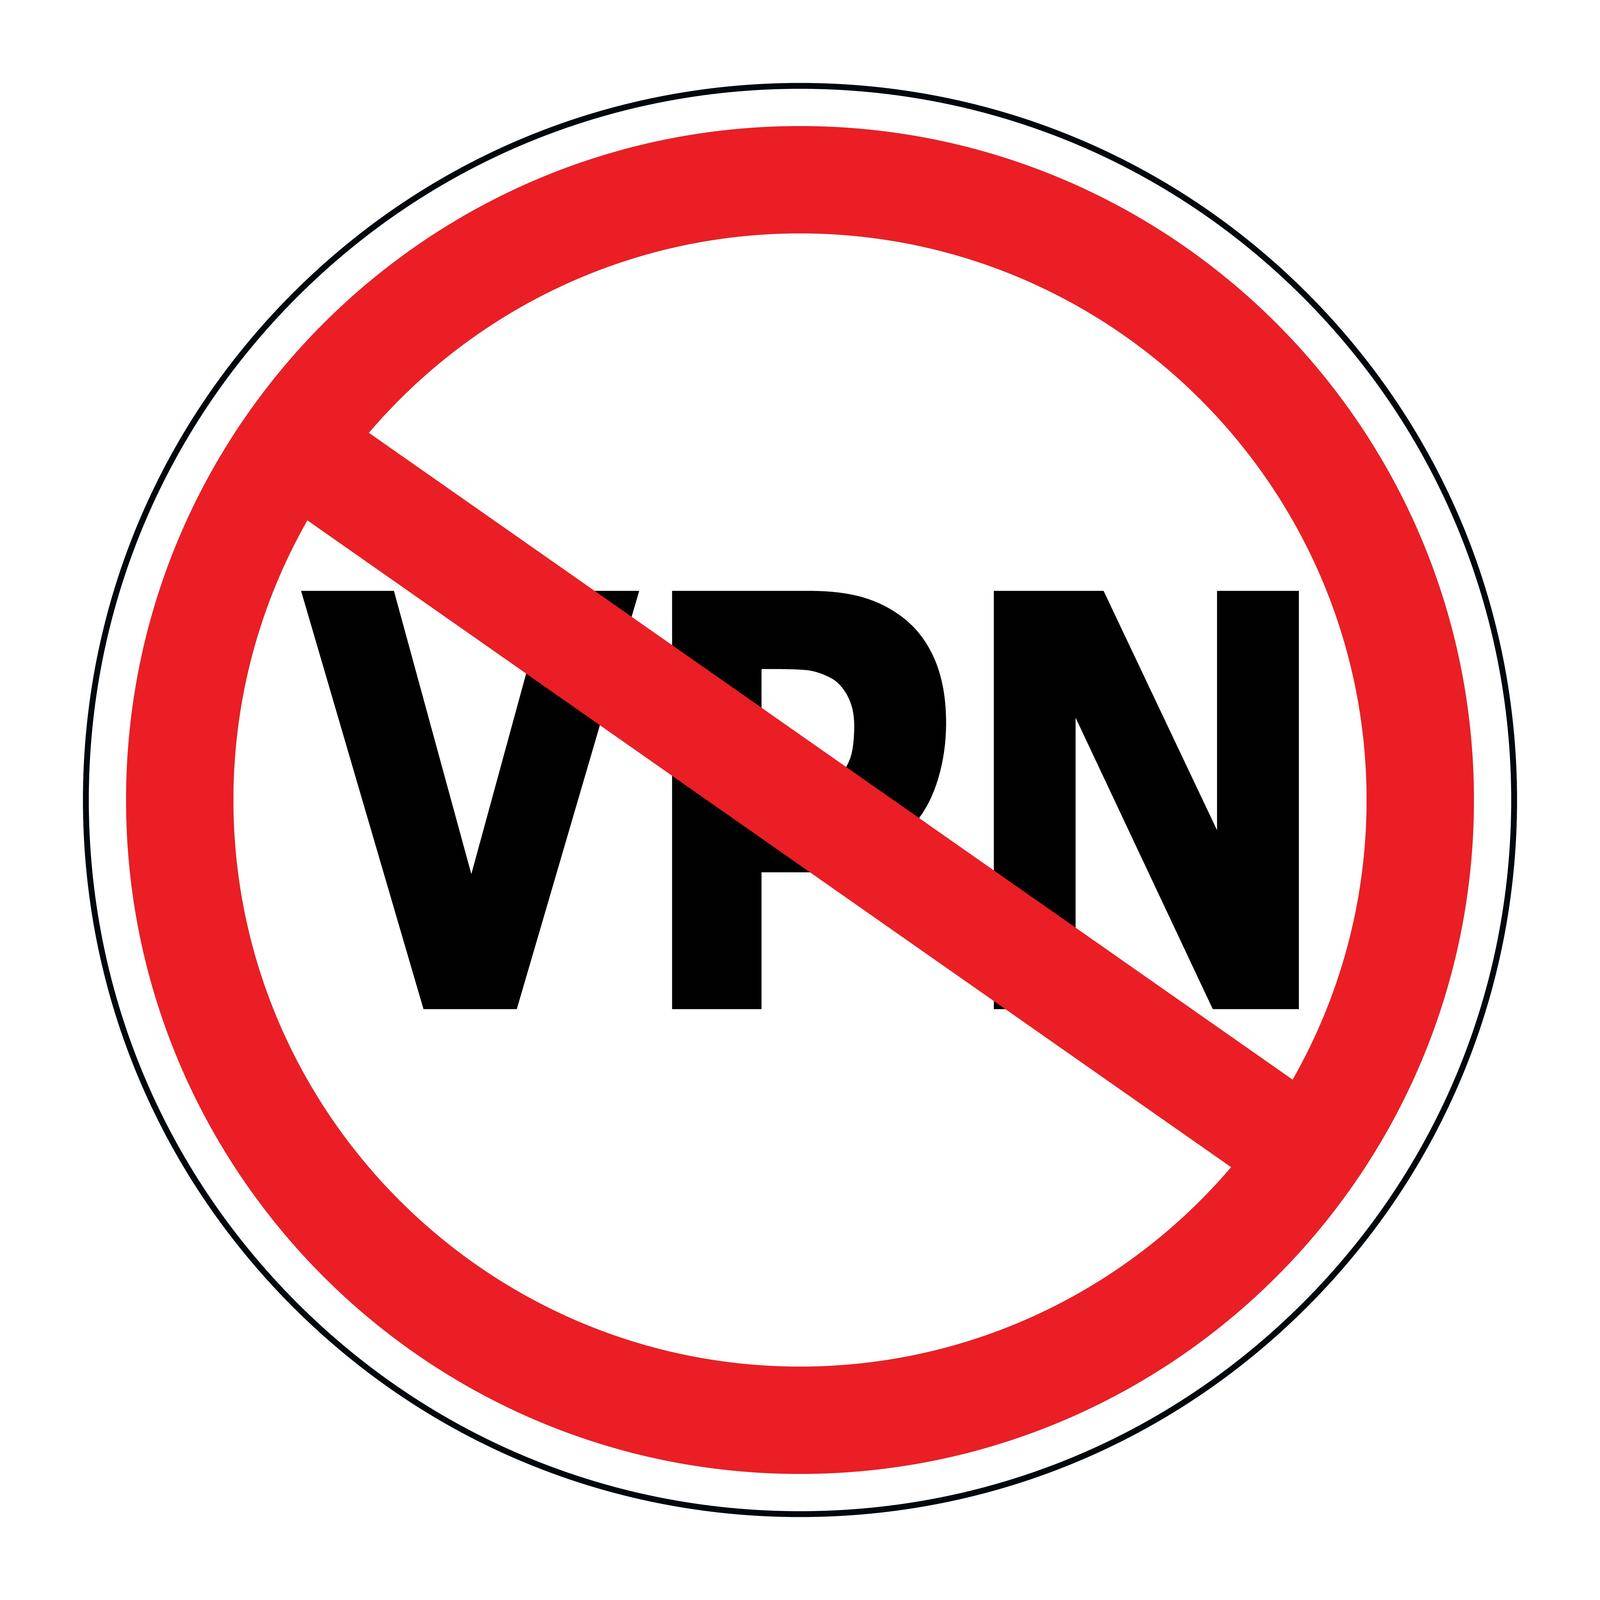 Sign prohibiting the use of the Anonymizer service VPN, sign vector red crossed out circle the word VPN, Virtual Private Network